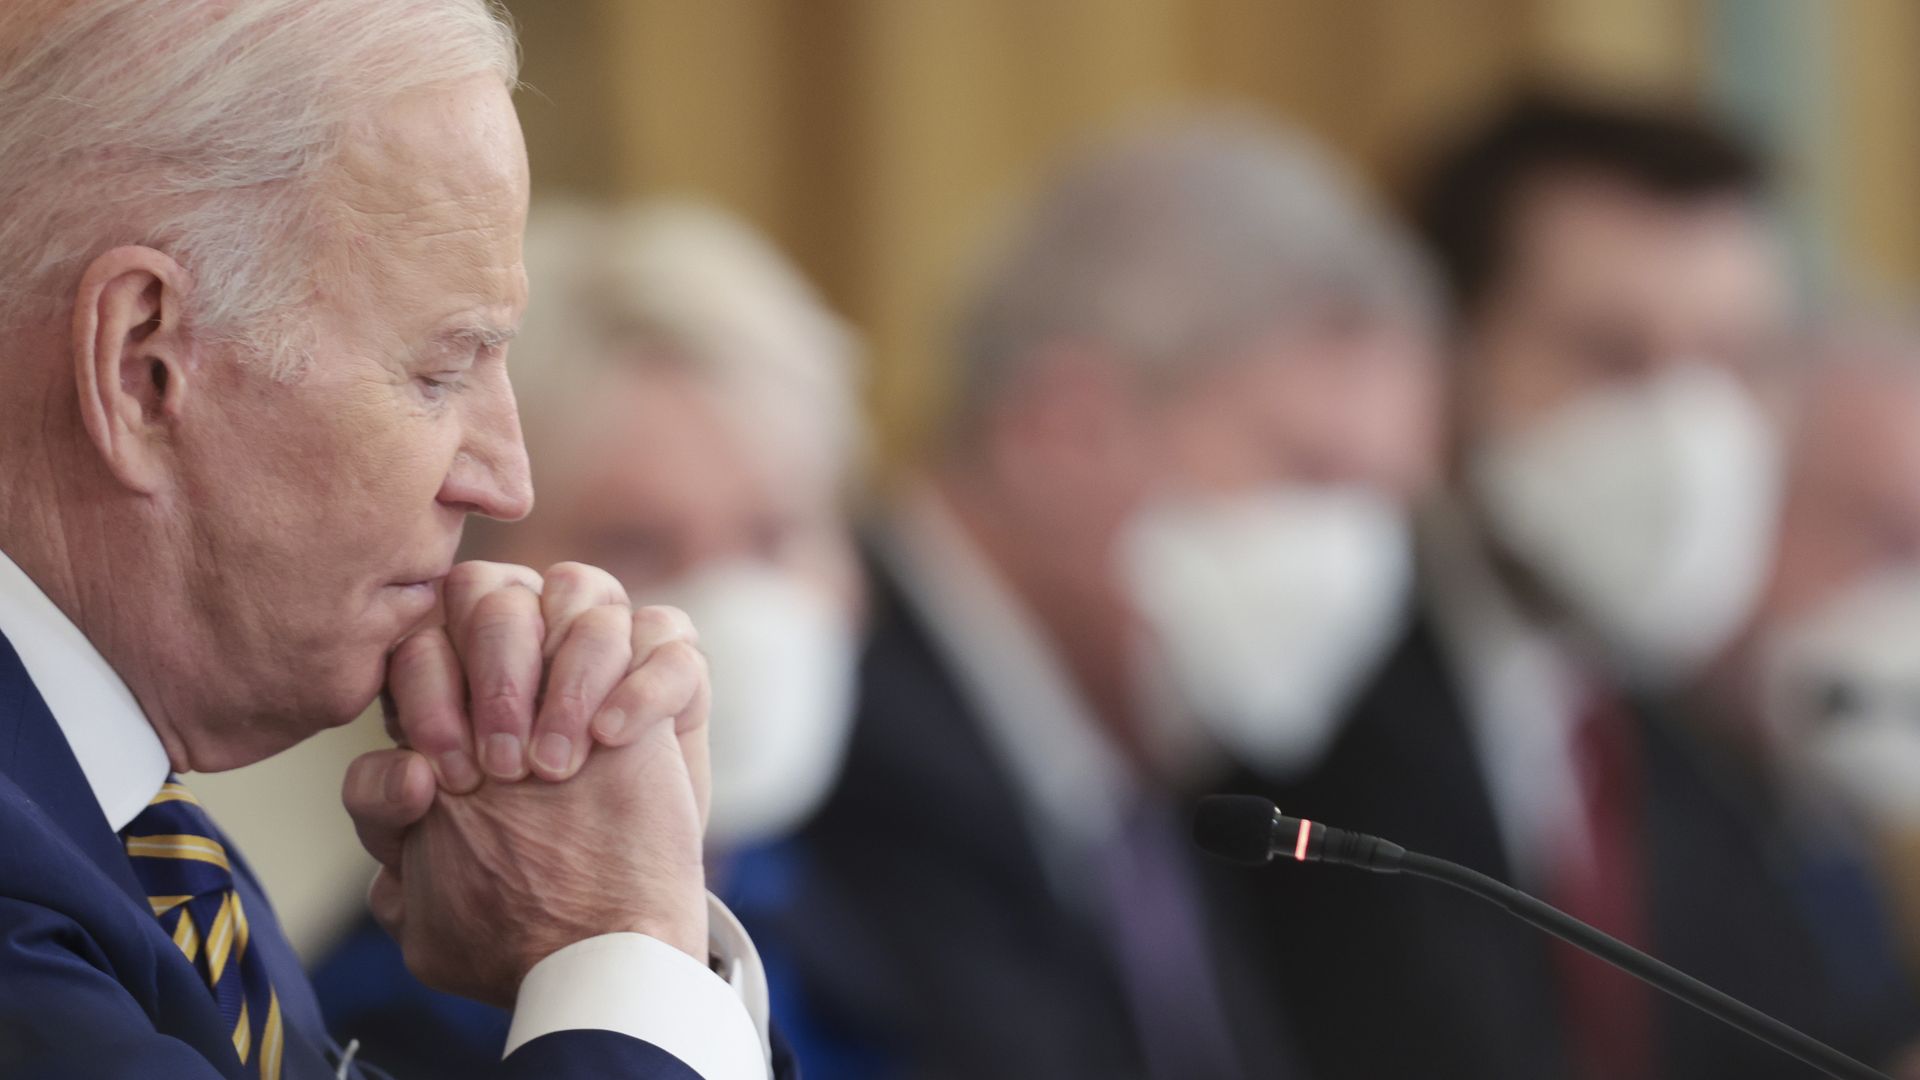 Photo of Joe Biden from the side as he rests his chin on clasped hands at a meeting